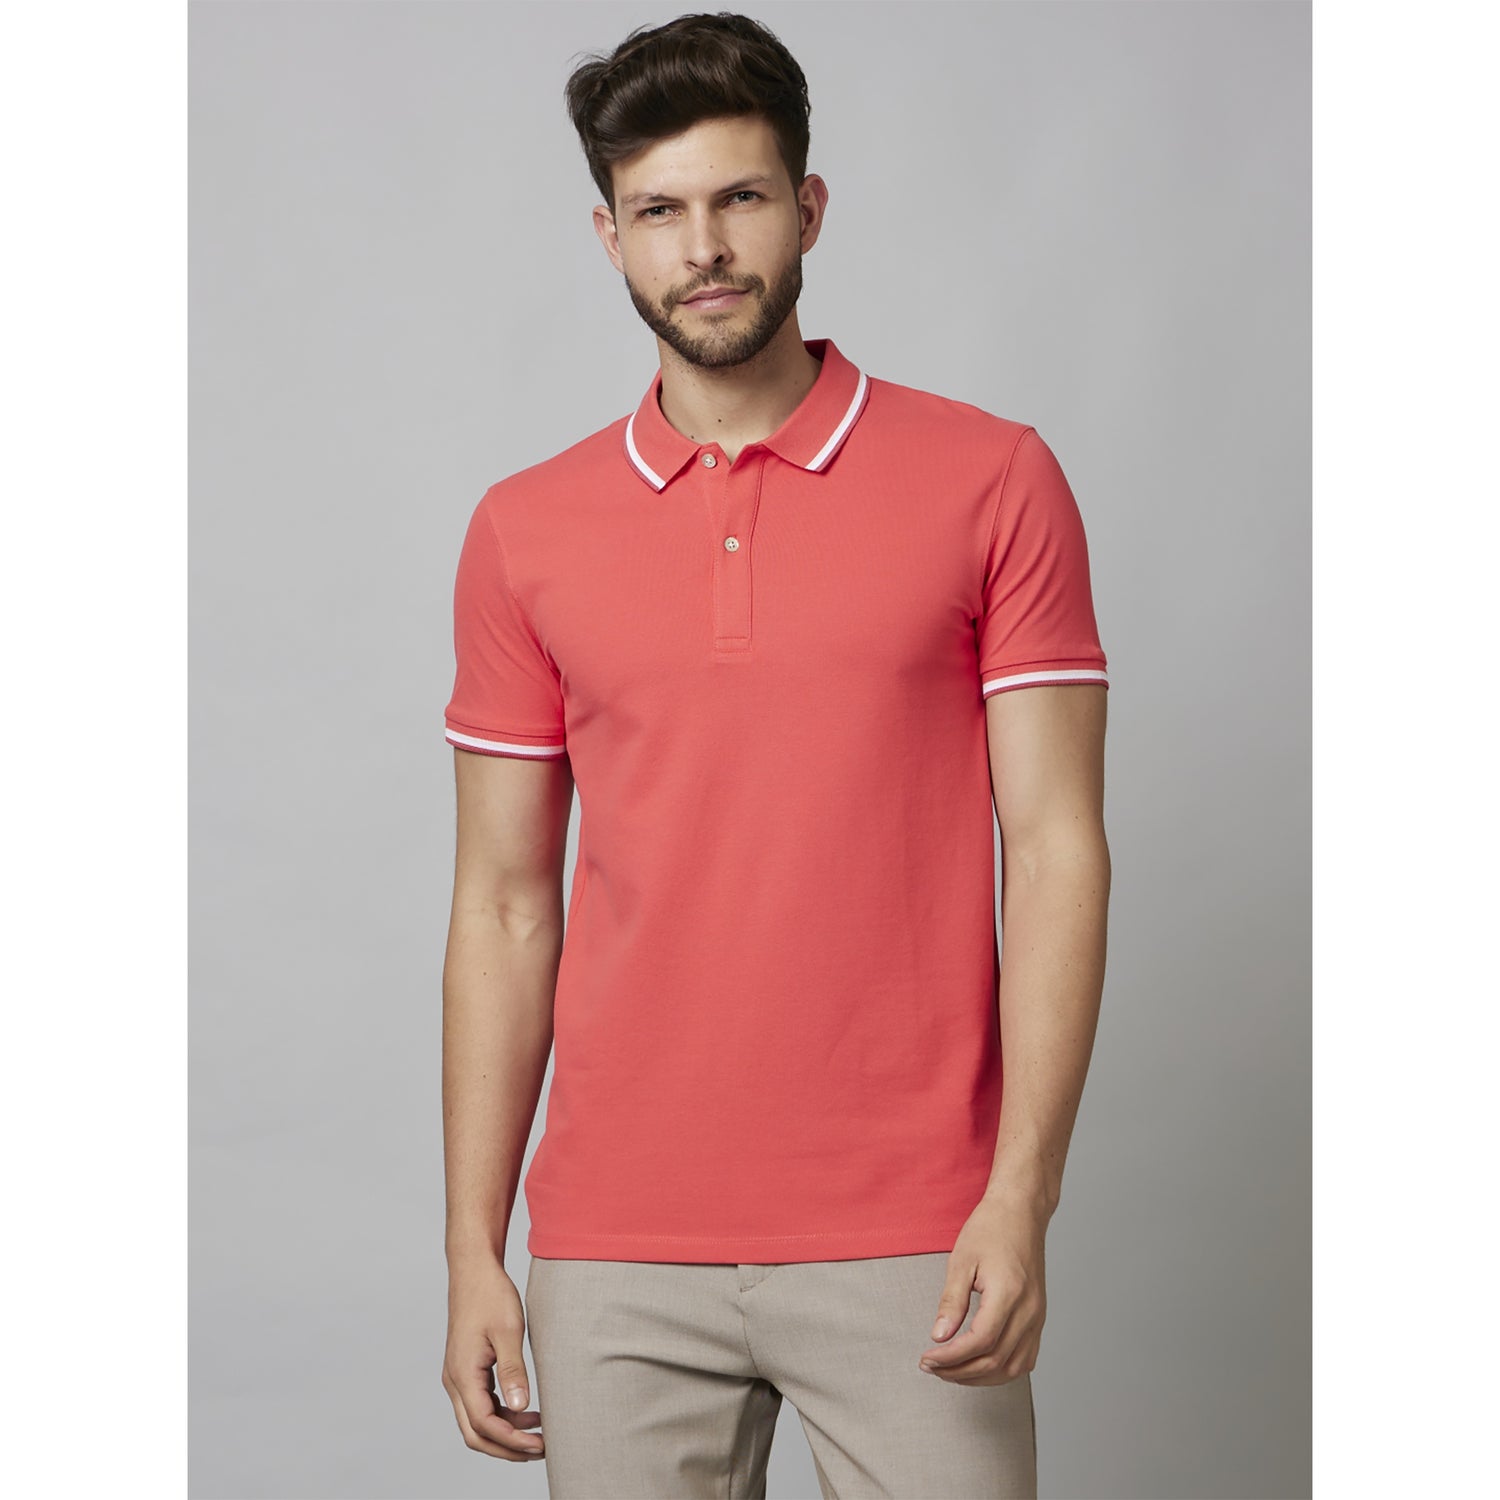 Men's Pink Solid Regular Fit Cotton Polo with Tipping Tshirt (DECOLRAYEBIN)